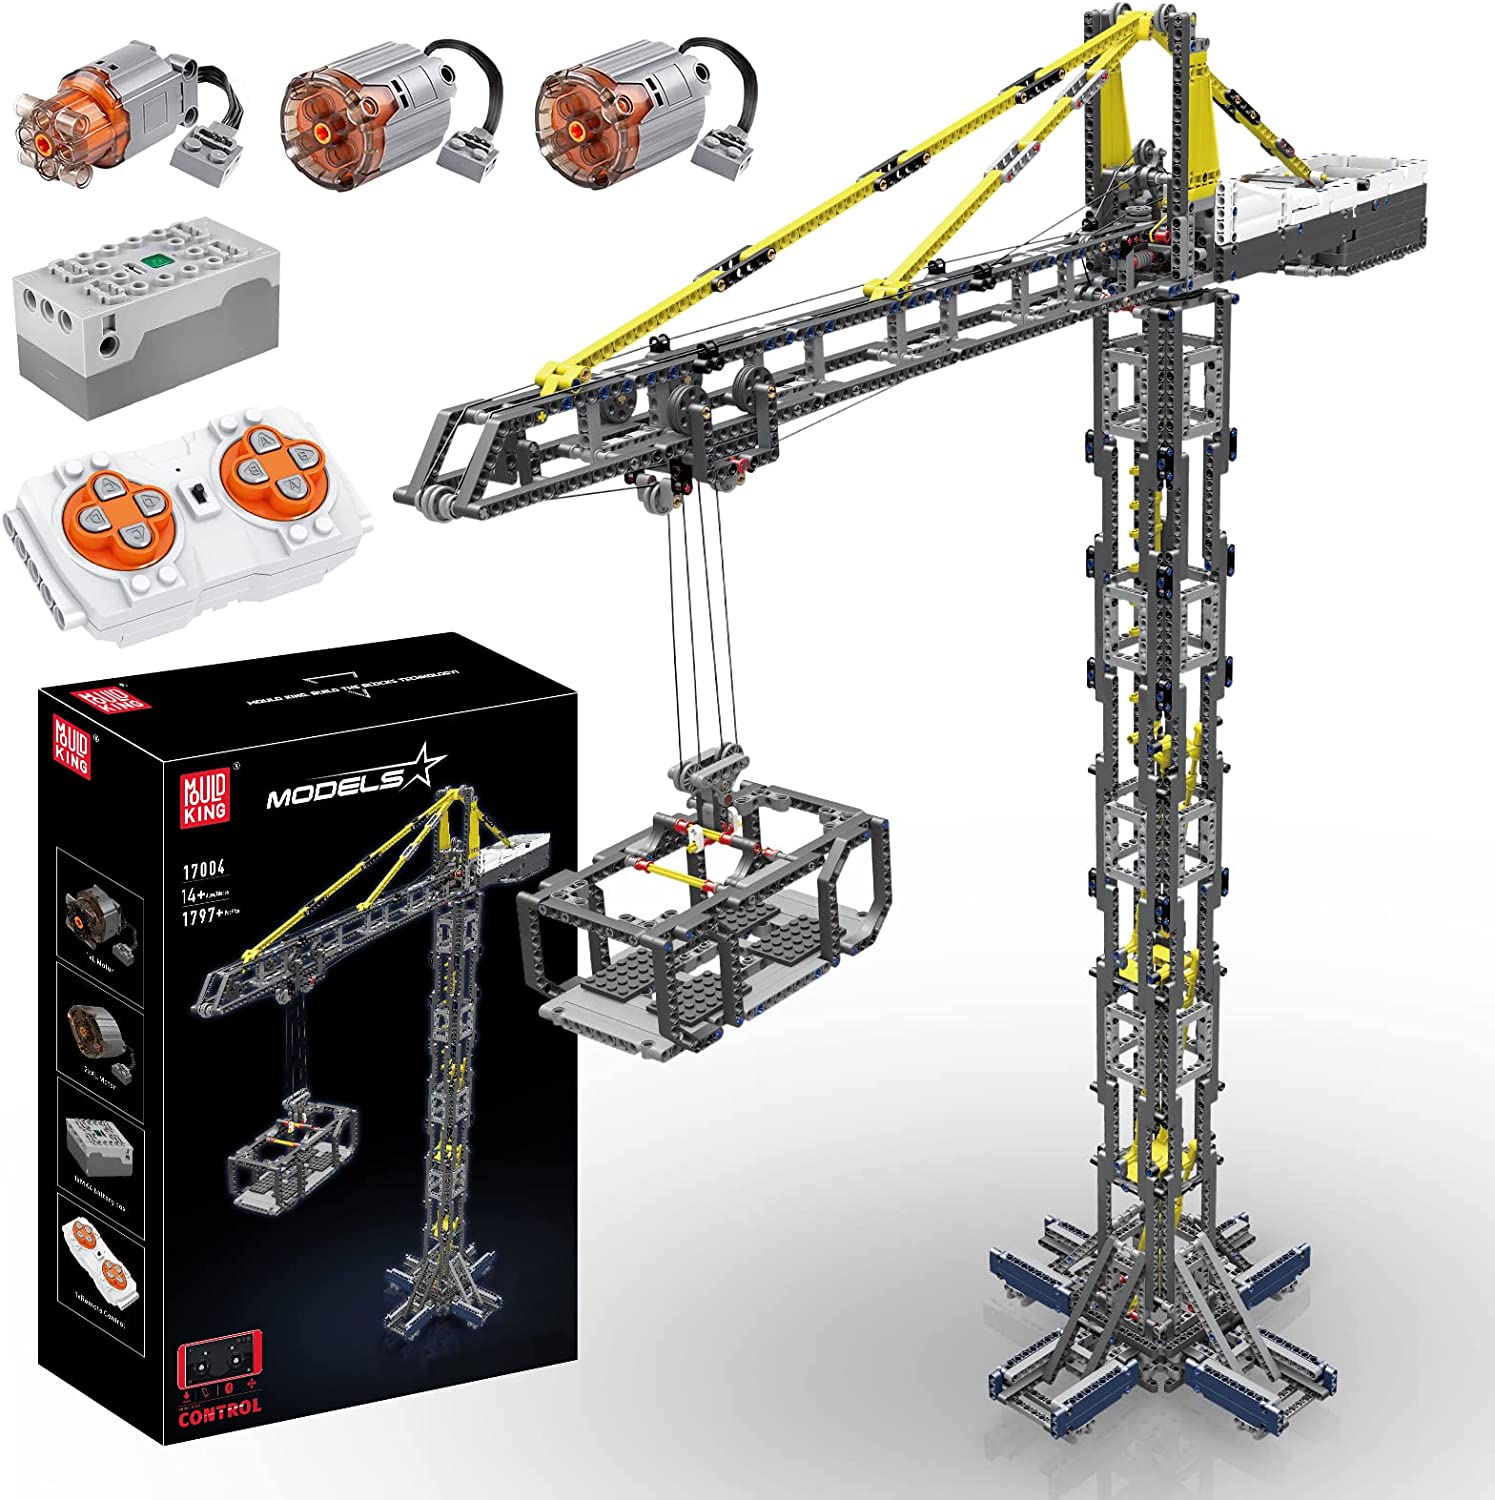 Mould King 17004 - Tower crane, normal